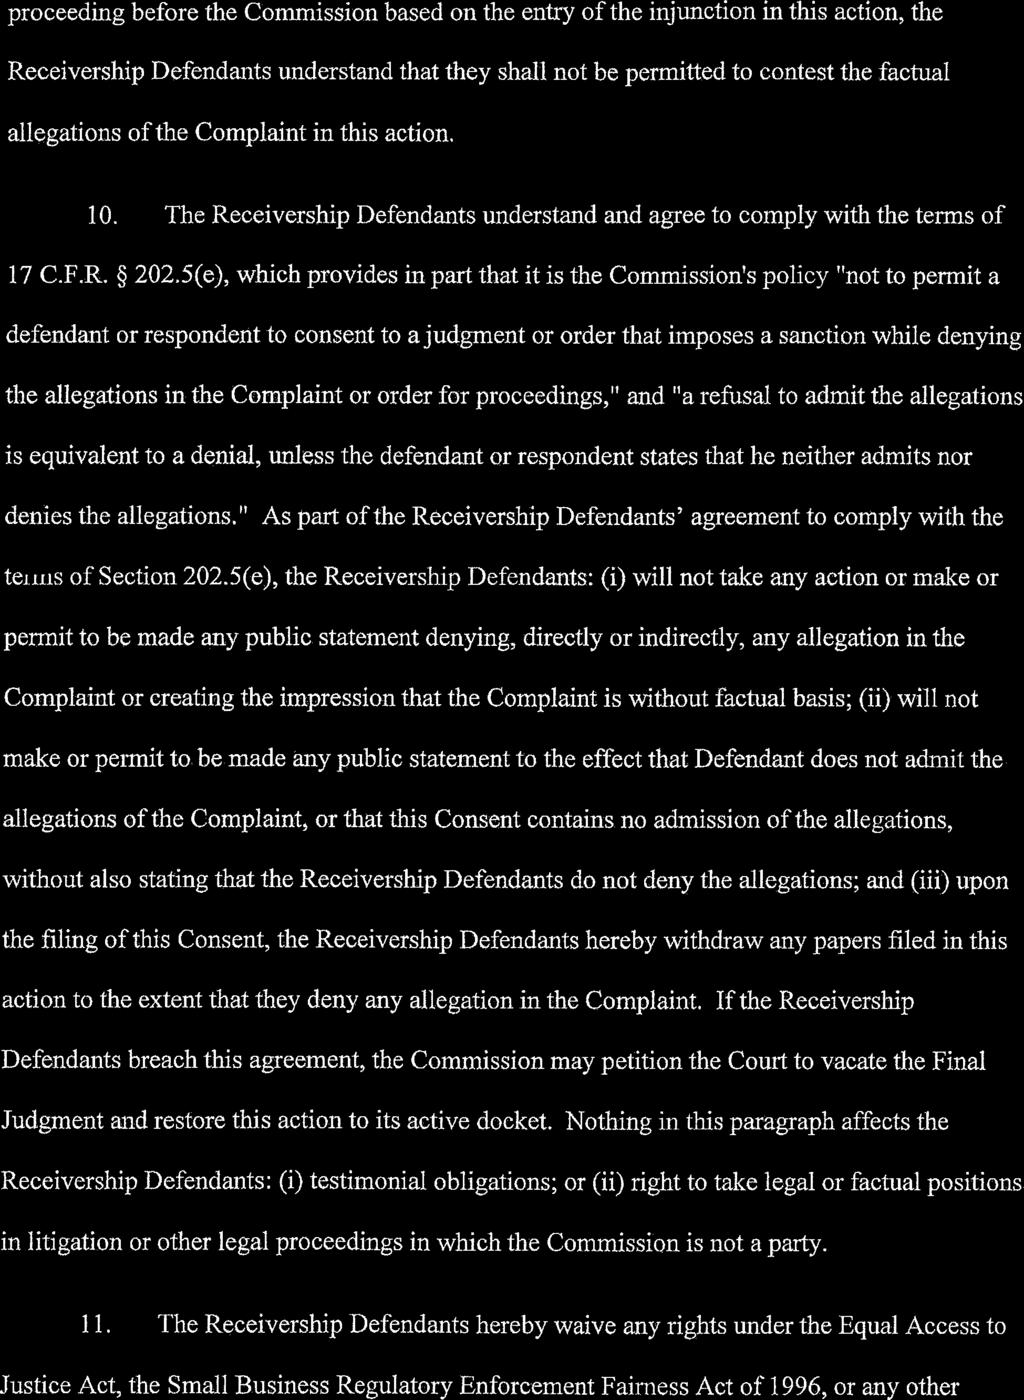 Case 1:14-cv-01002-CRC Document 238 Filed 03/08/19 Page 4 of 11 proceeding before the Cornrnission based on the entry of the injunction in this action, the Receivership Defendants understand that